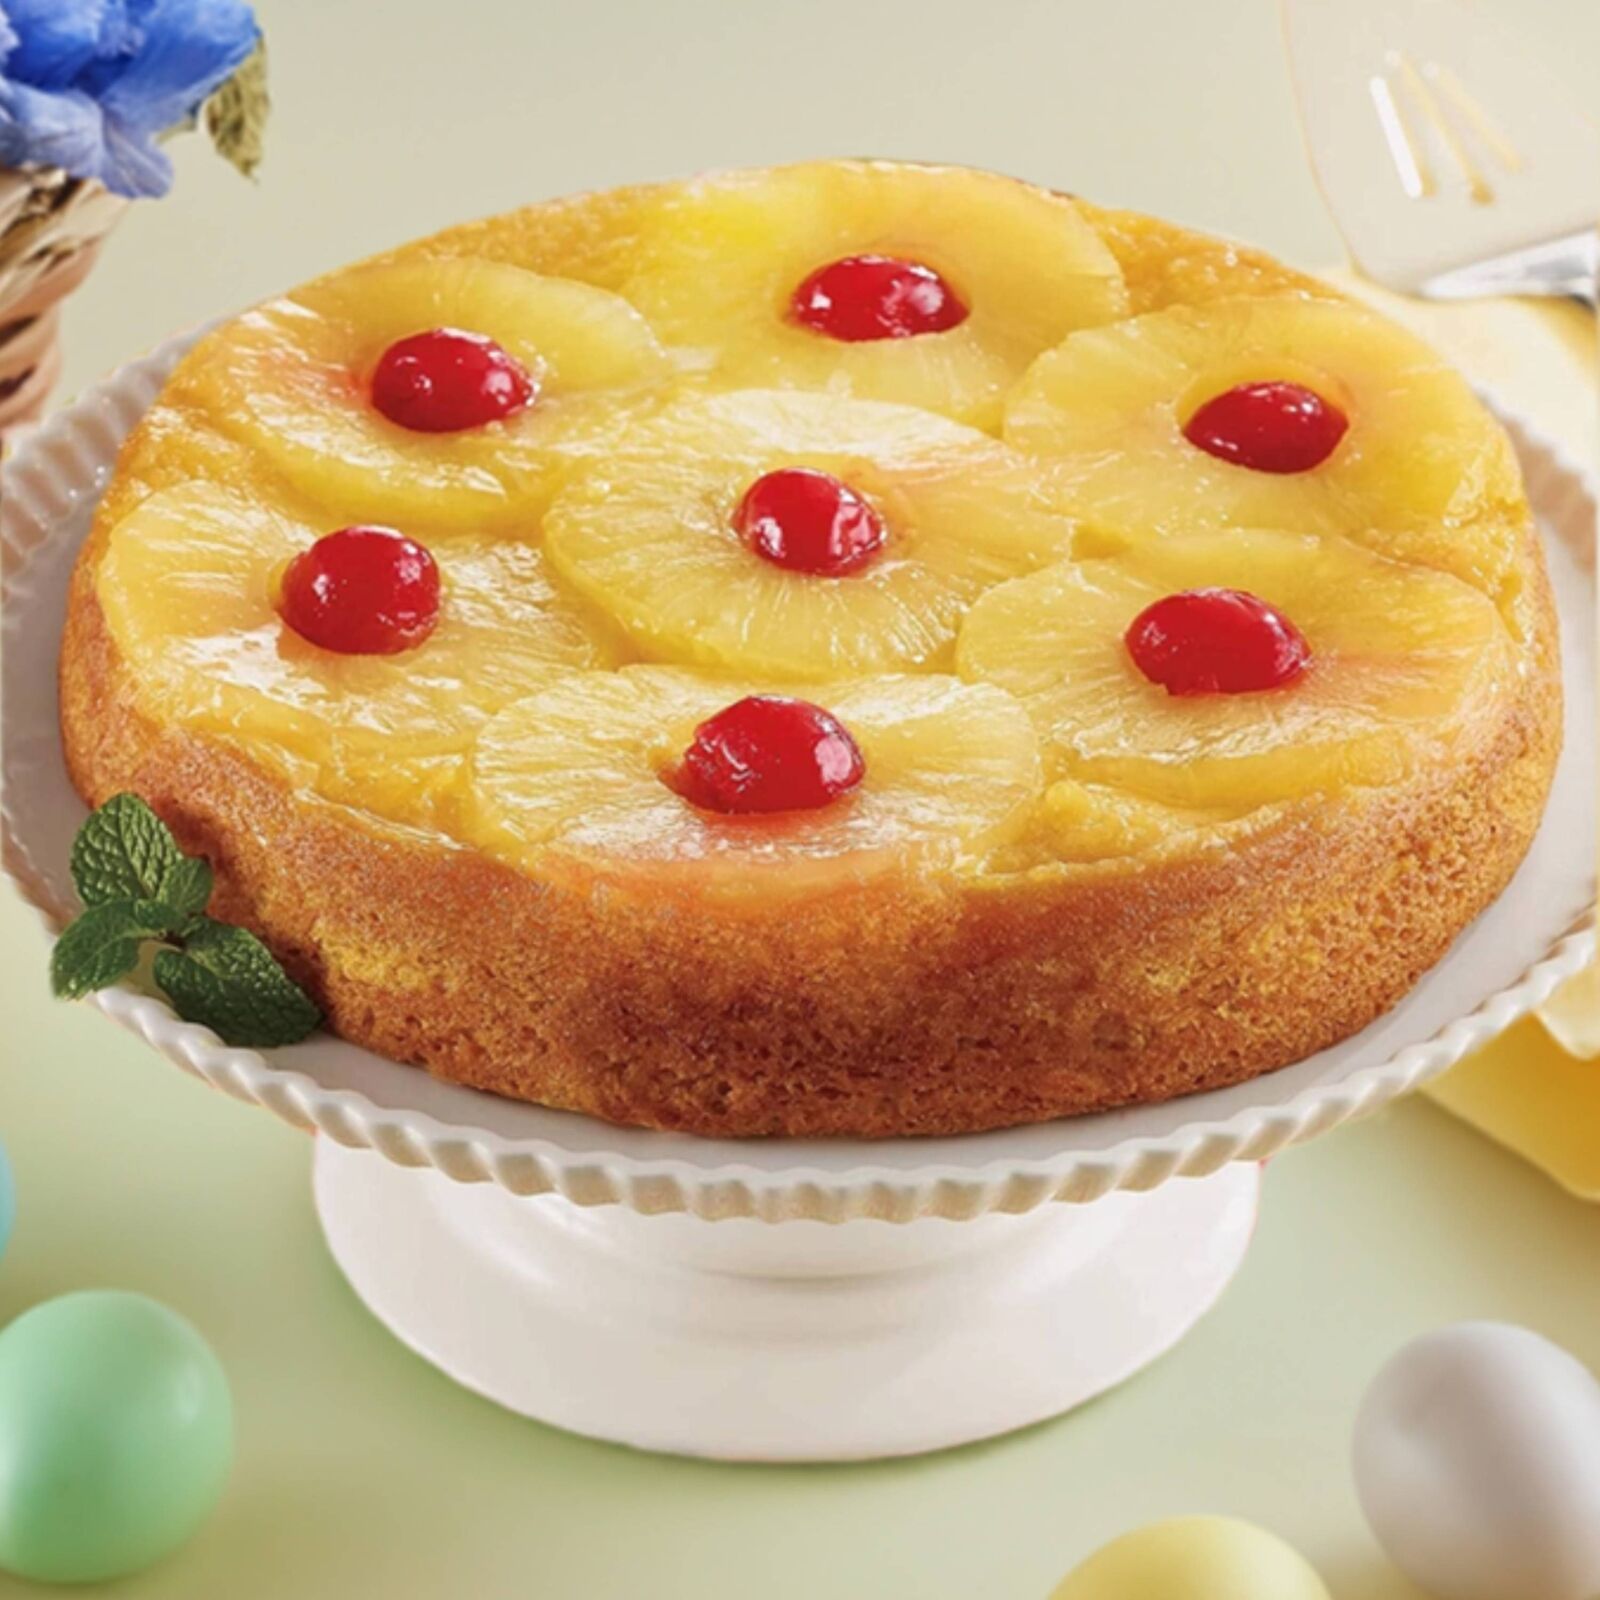 Andy Anand Gluten Free Gourmet Pineapple Upside Down Cake - 2.4 lbs - $59.24